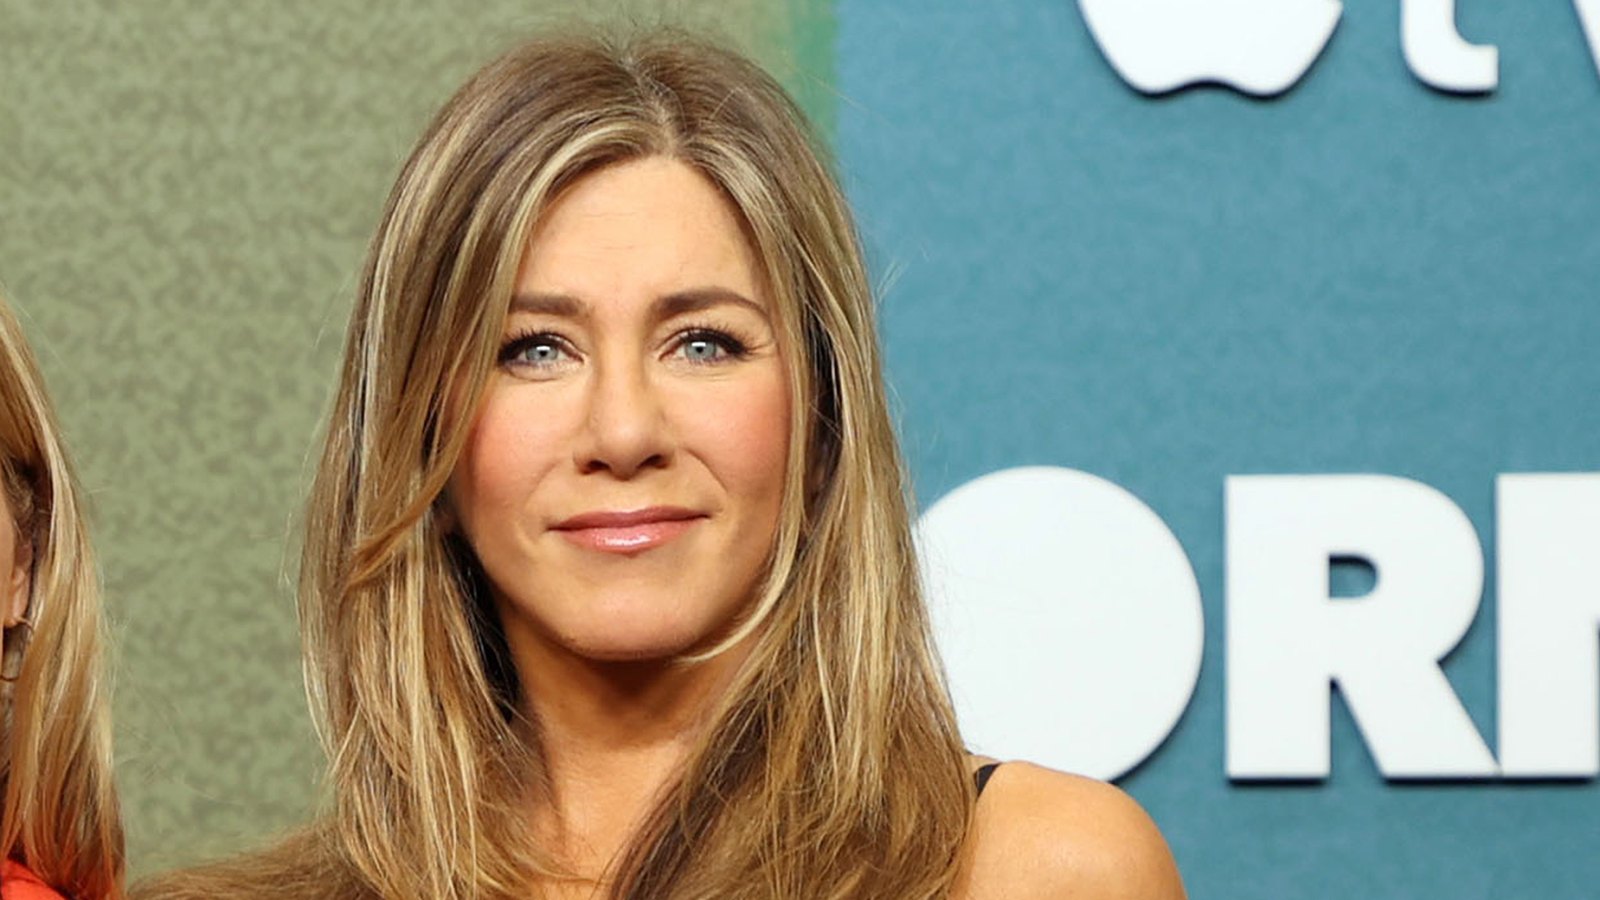 Jennifer Aniston delights fans with her surprise appearance in Los Angeles